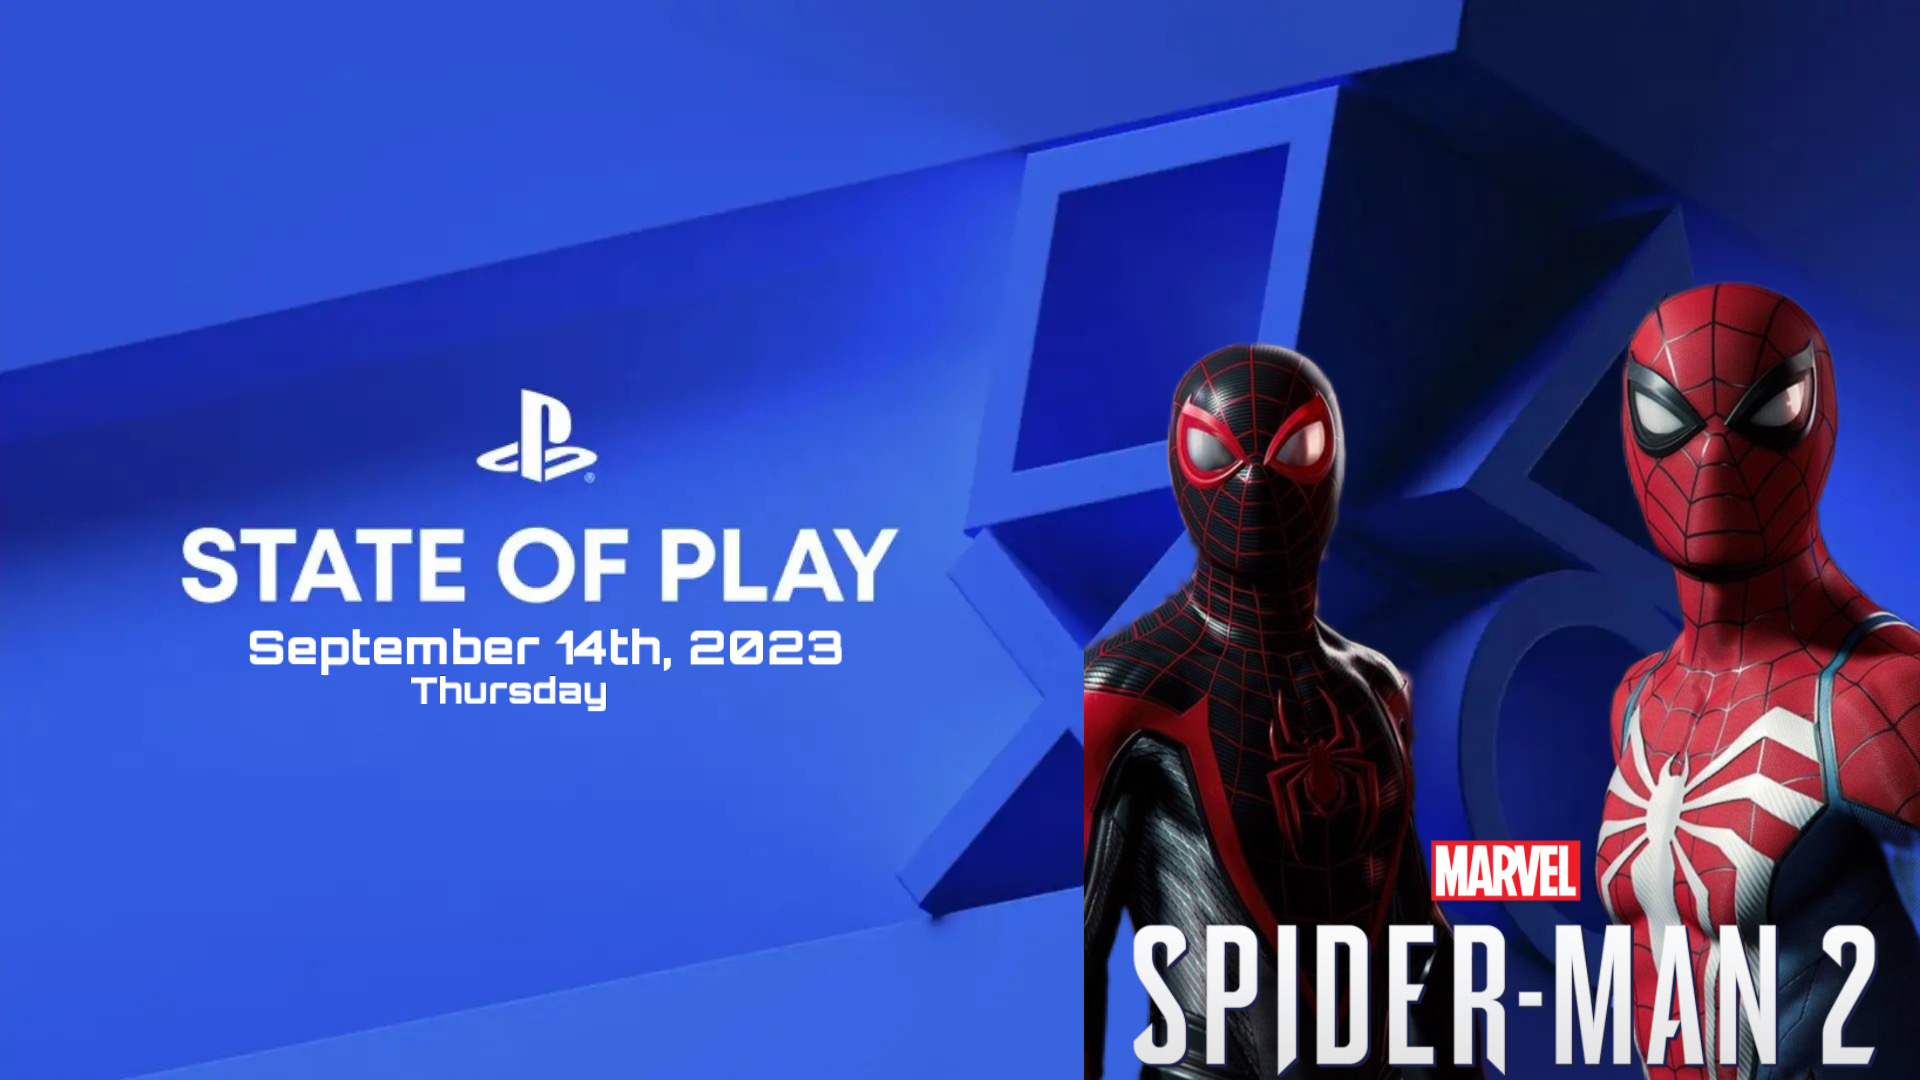 Marvel's Spider-Man 2 on X: Marvel's Spider-Man 2 DLC coming soon &  Wolverine will be making an appearance, the dlc will cost $19.99  #MarvelsSpiderMan2 #SpiderMan2 #SpiderMan2PS5 #BeGreaterTogether #Wolverine  #MarvelsWolverine  / X